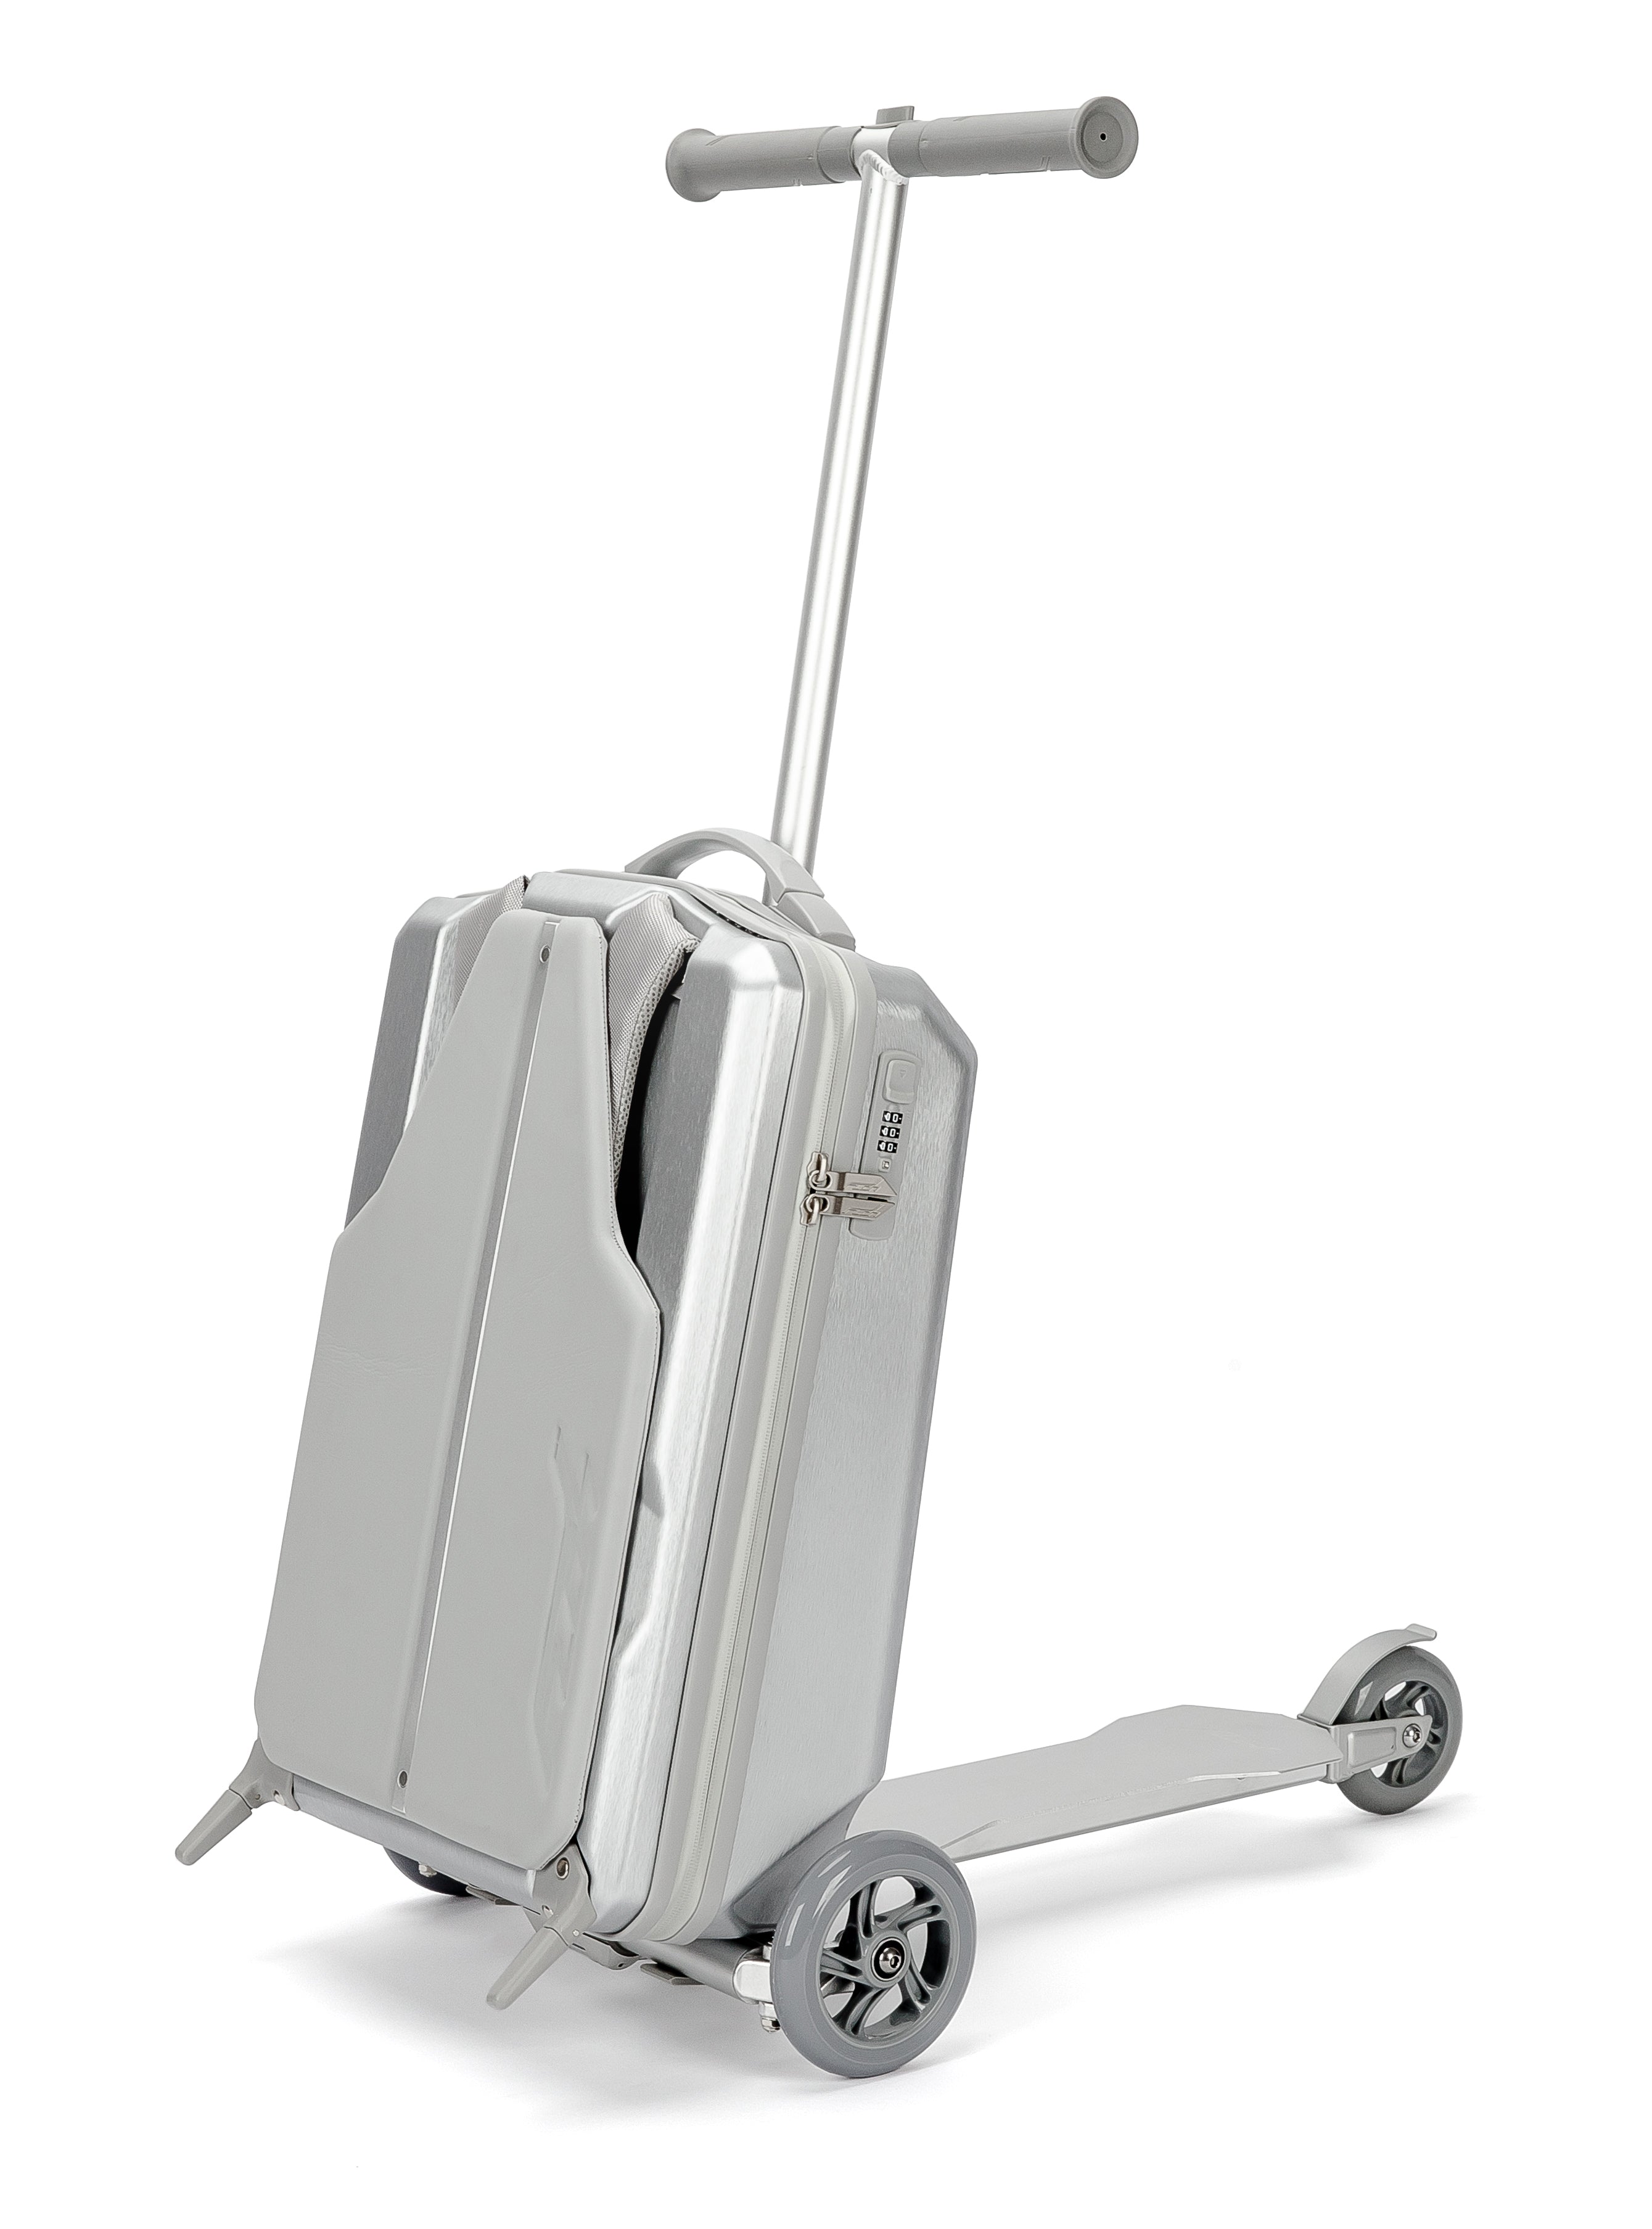 Samsonite Scooter-Suitcase Attracts Men, Repels Women | WIRED